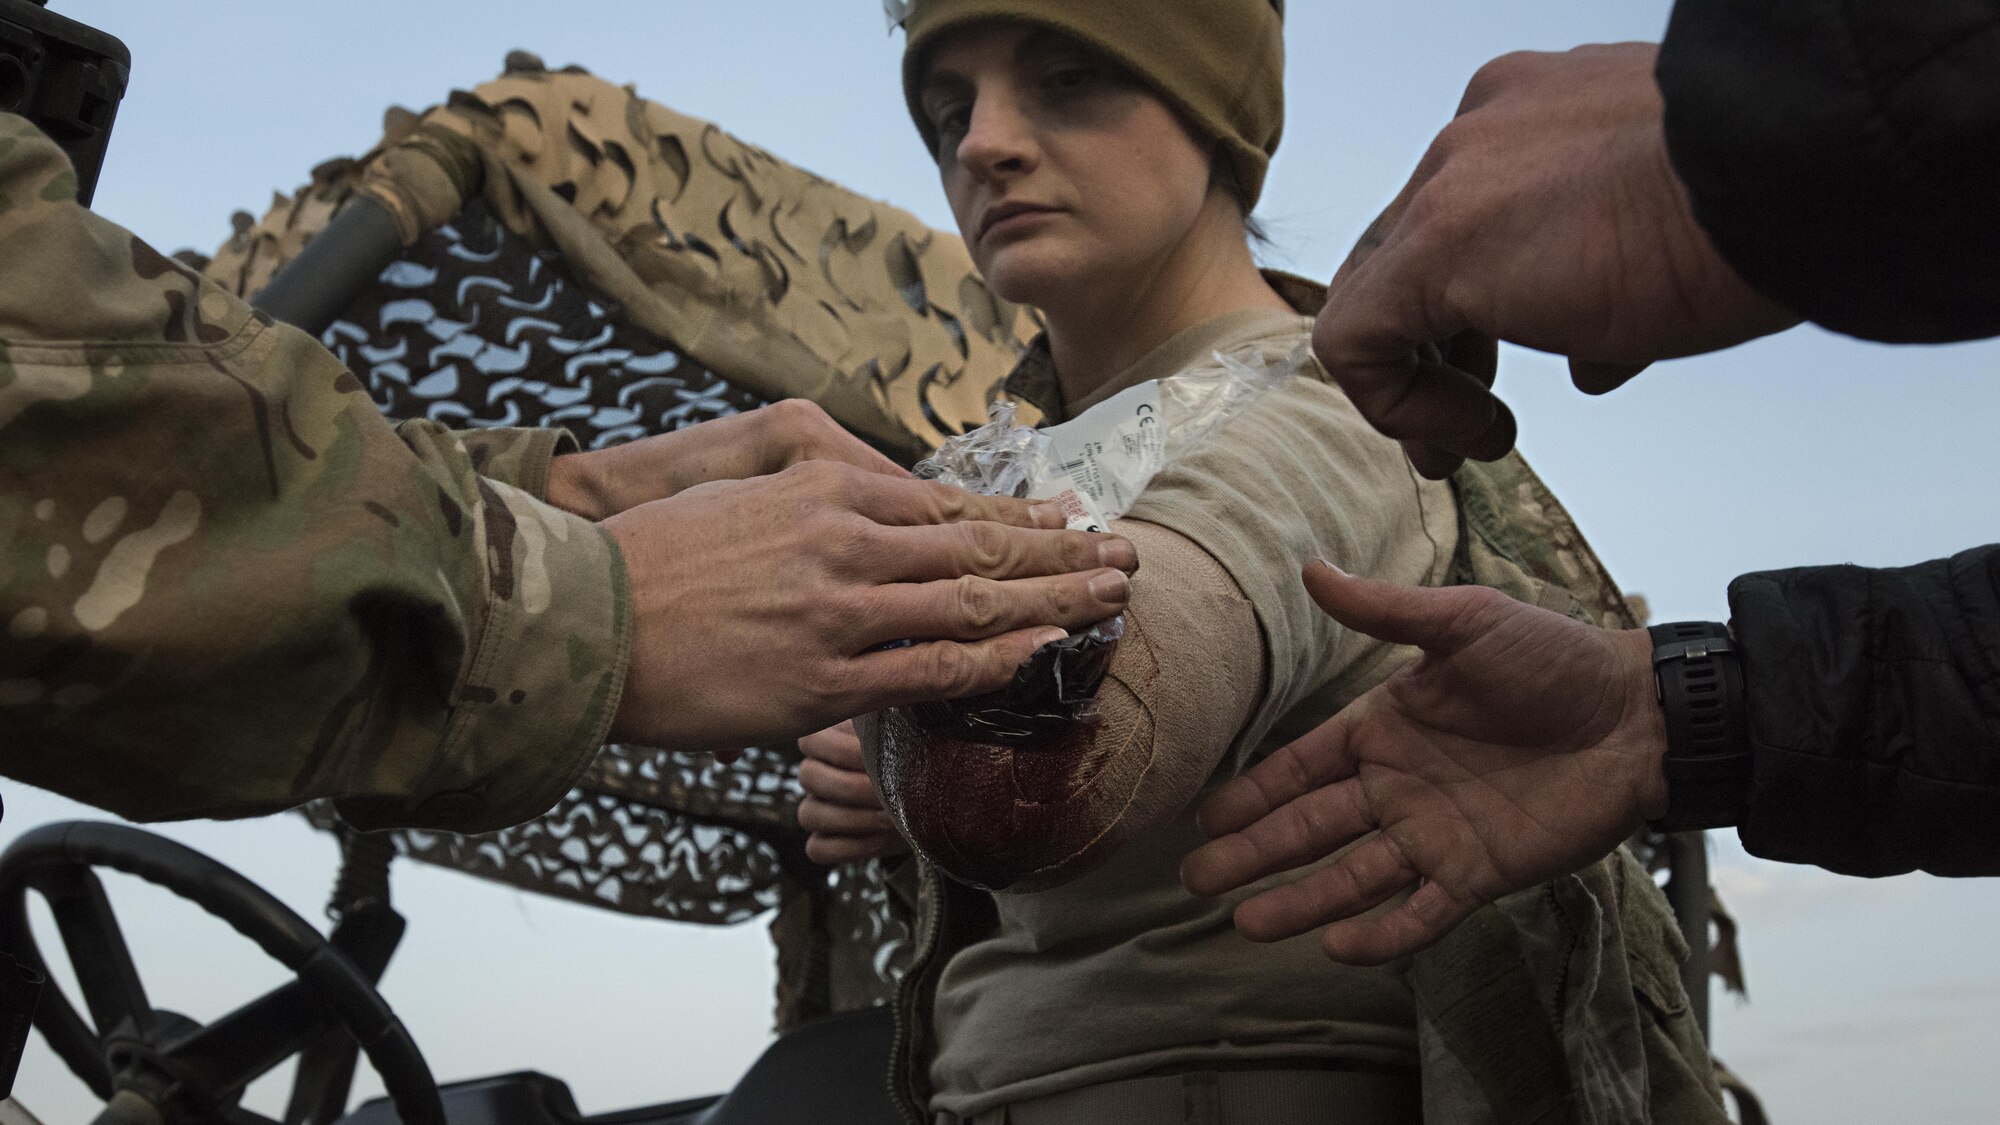 Pararescuemen apply moulage to Senior Airman Kelsey Desz, 83rd Expeditionary Rescue Squadron aviation resource manager, before a mass casualty exercise held Nov. 17, 2016 at Bagram Airfield, Afghanistan. Moulage is makeup used to create lifelike injuries to provide realistic training. (U.S. Air Force photo by Staff Sgt. Katherine Spessa)